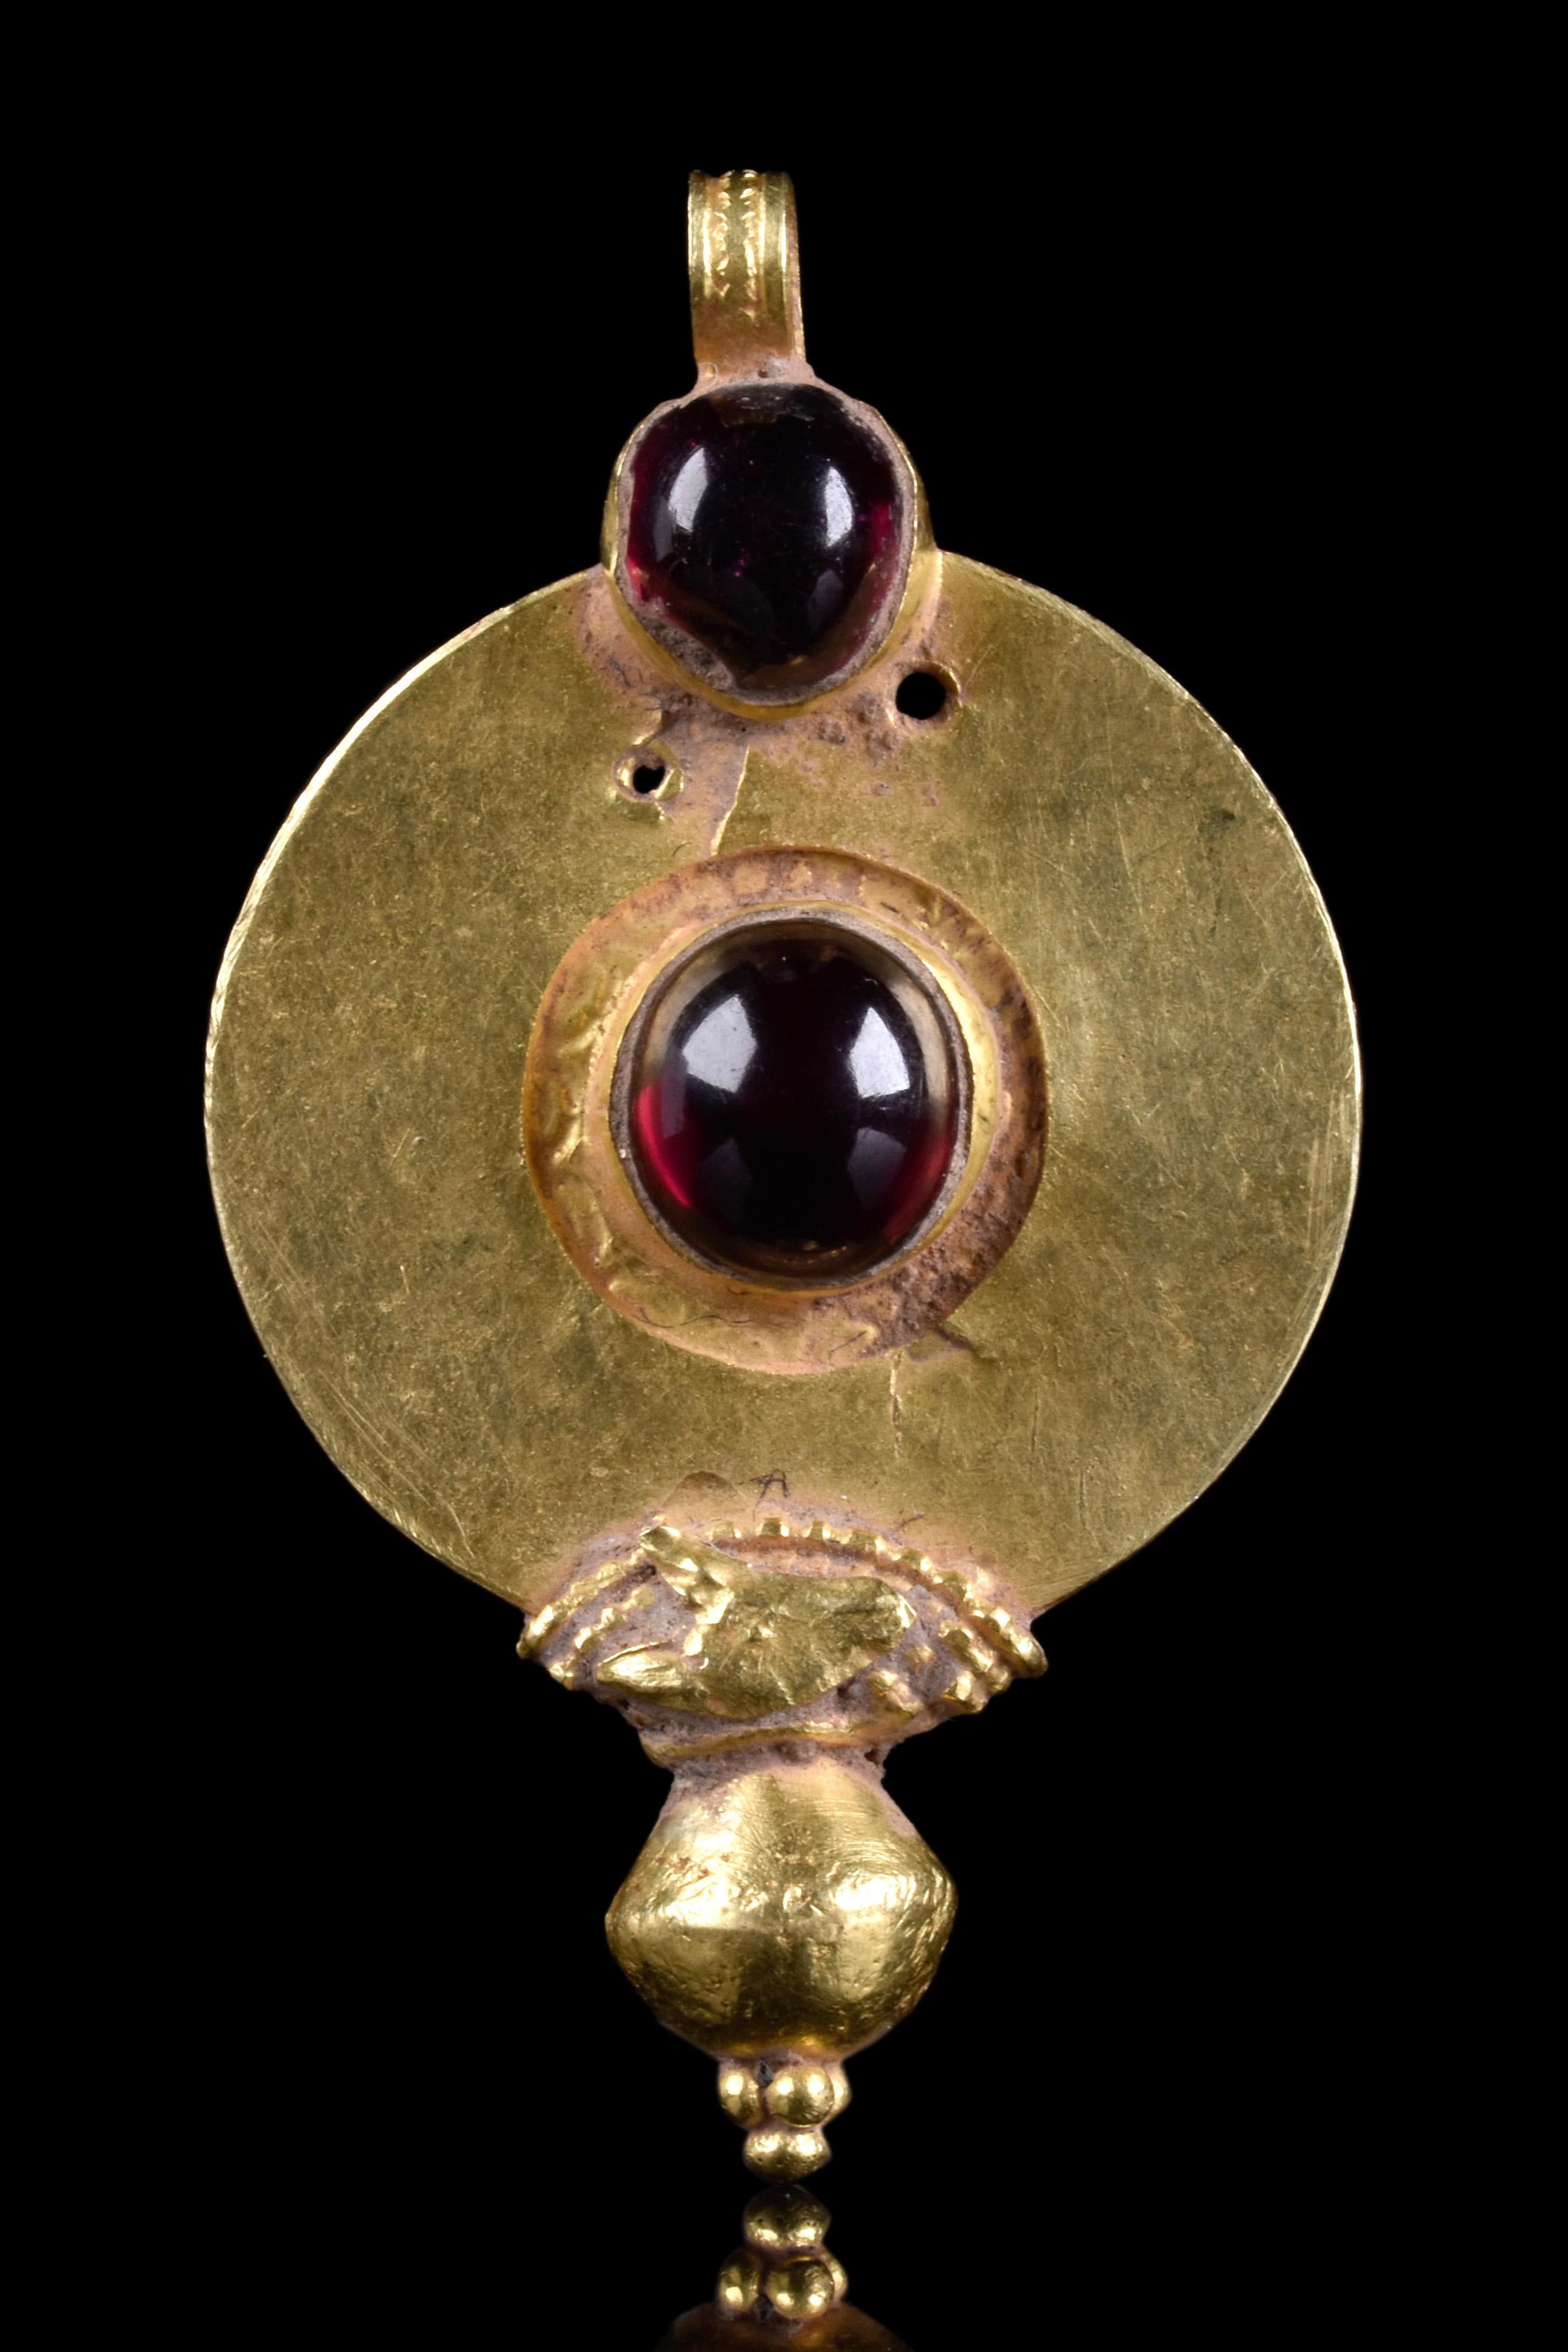 A thin, circular Roman gold pendant featuring a central garnet cabochon gem held within a raised cell. Above it, another garnet cabochon enriches the piece. The item is topped by a suspension loop. At the bottom, a biconical decoration with filigree